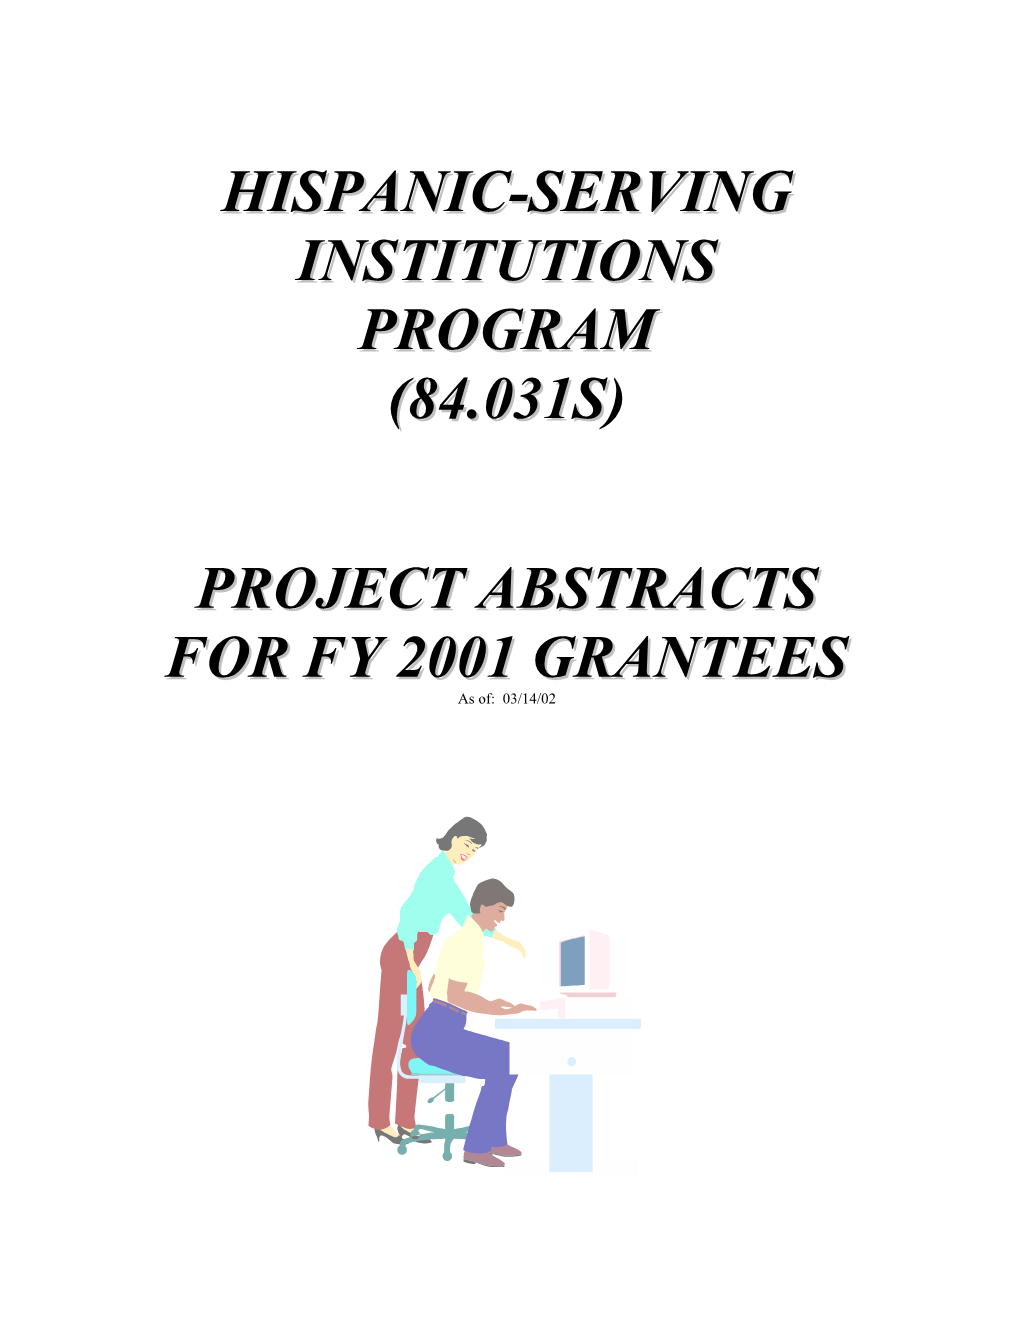 Hispanic-Serving Institutions Program (84.031Ss) Project Abstracts for Fy